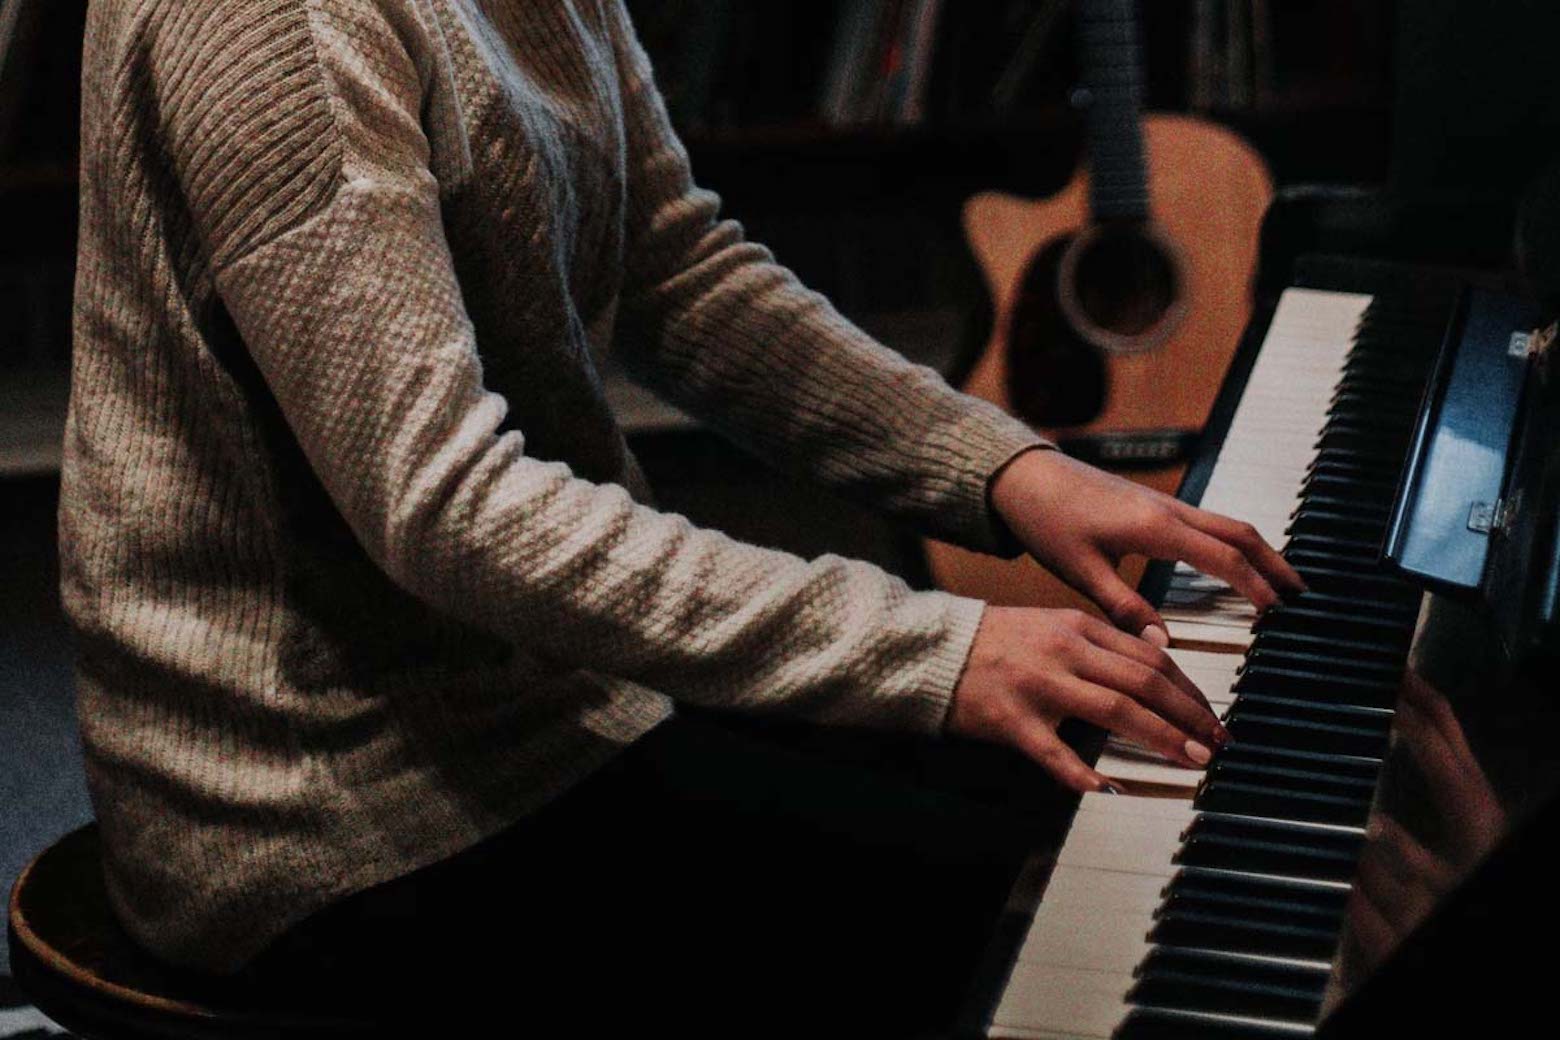 Become a pro piano player for less than $5 a course with this bootcamp loved by musicians.